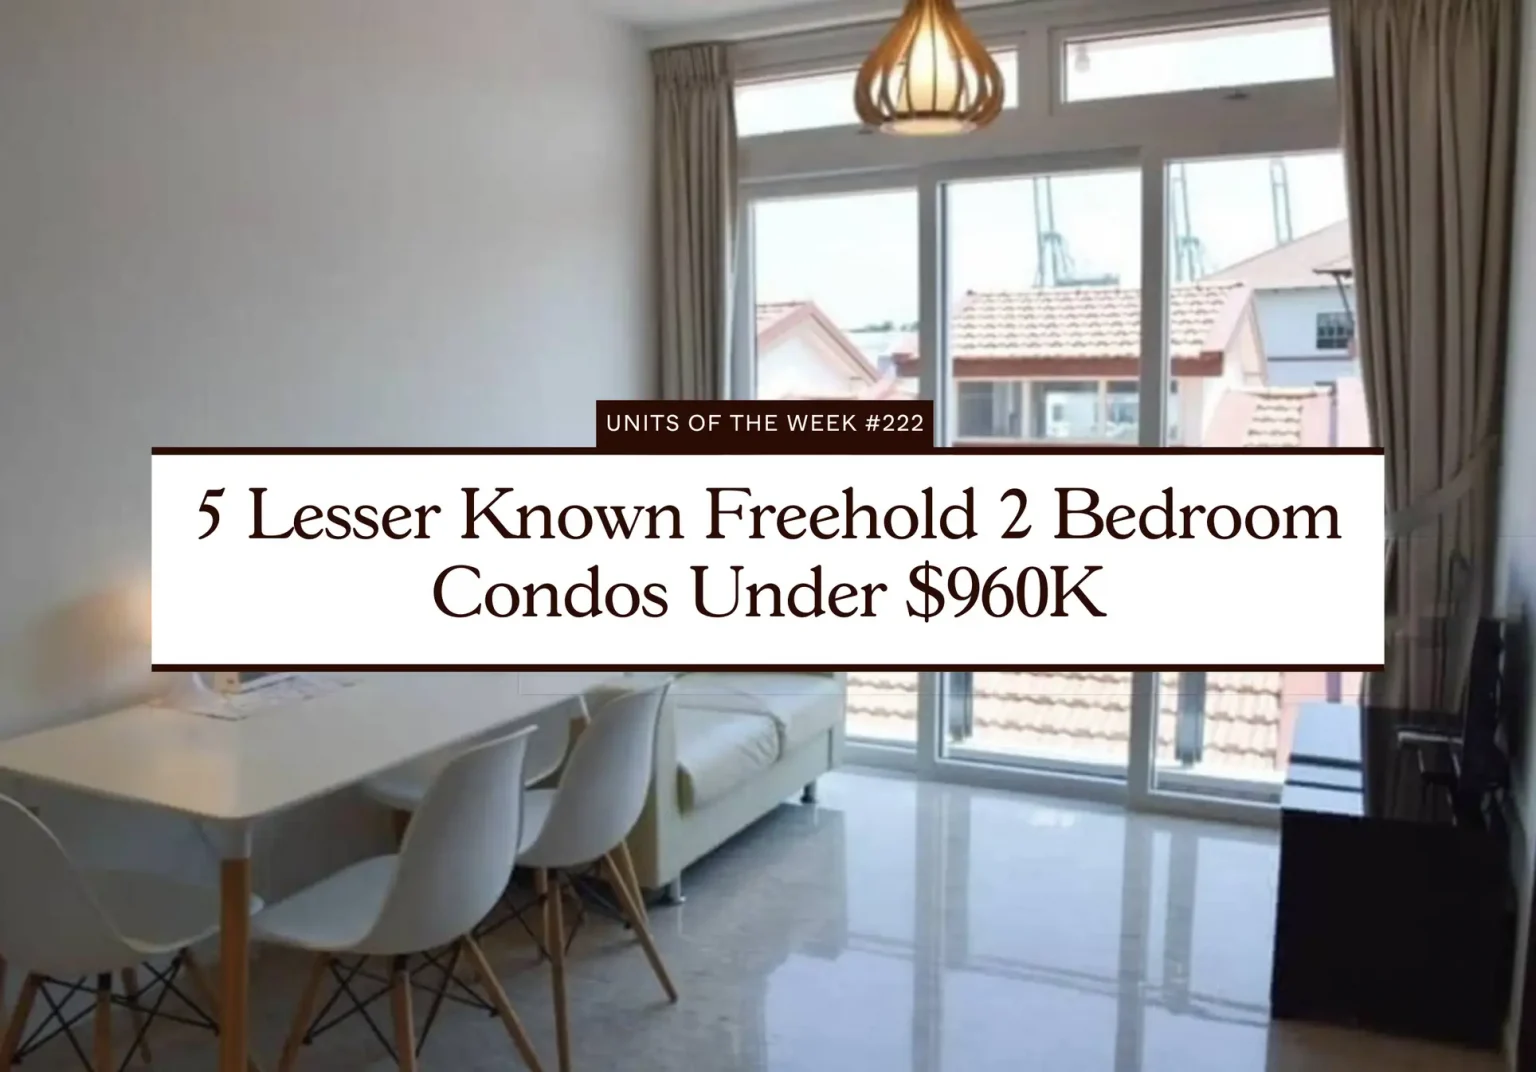 5 Lesser Known Freehold 2 Bedroom Condos Under 960K